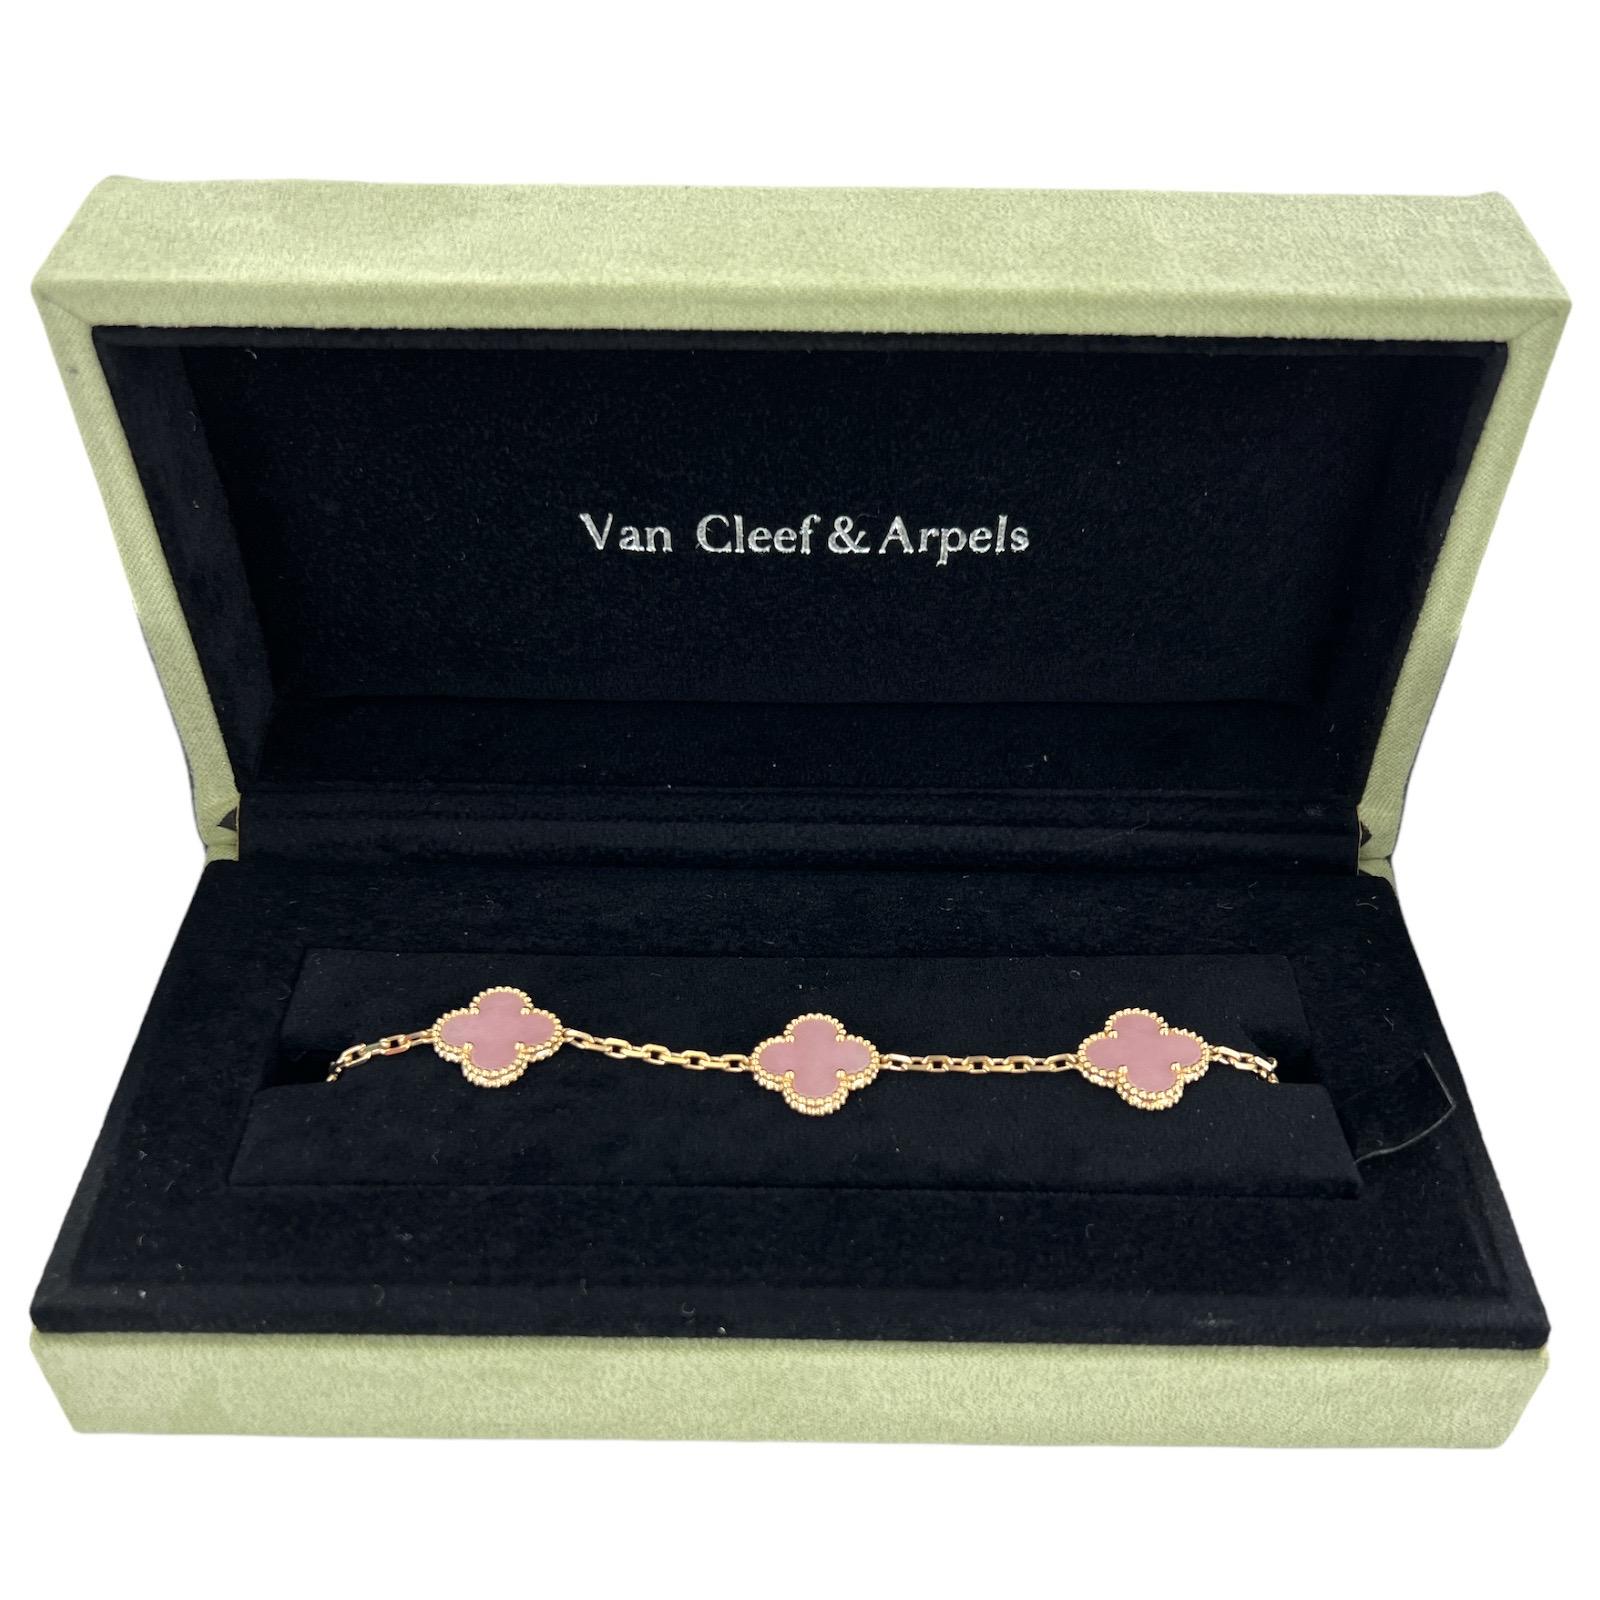 Van Cleef & Arpels Vintage Alhambra Pink Opal Bracelet fashioned in 18 karat yellow gold. This rare collectors piece is retired from the collection. The 5 motif bracelet is 7 inches in length, signed, numbered, and hallmarked. Comes in original box